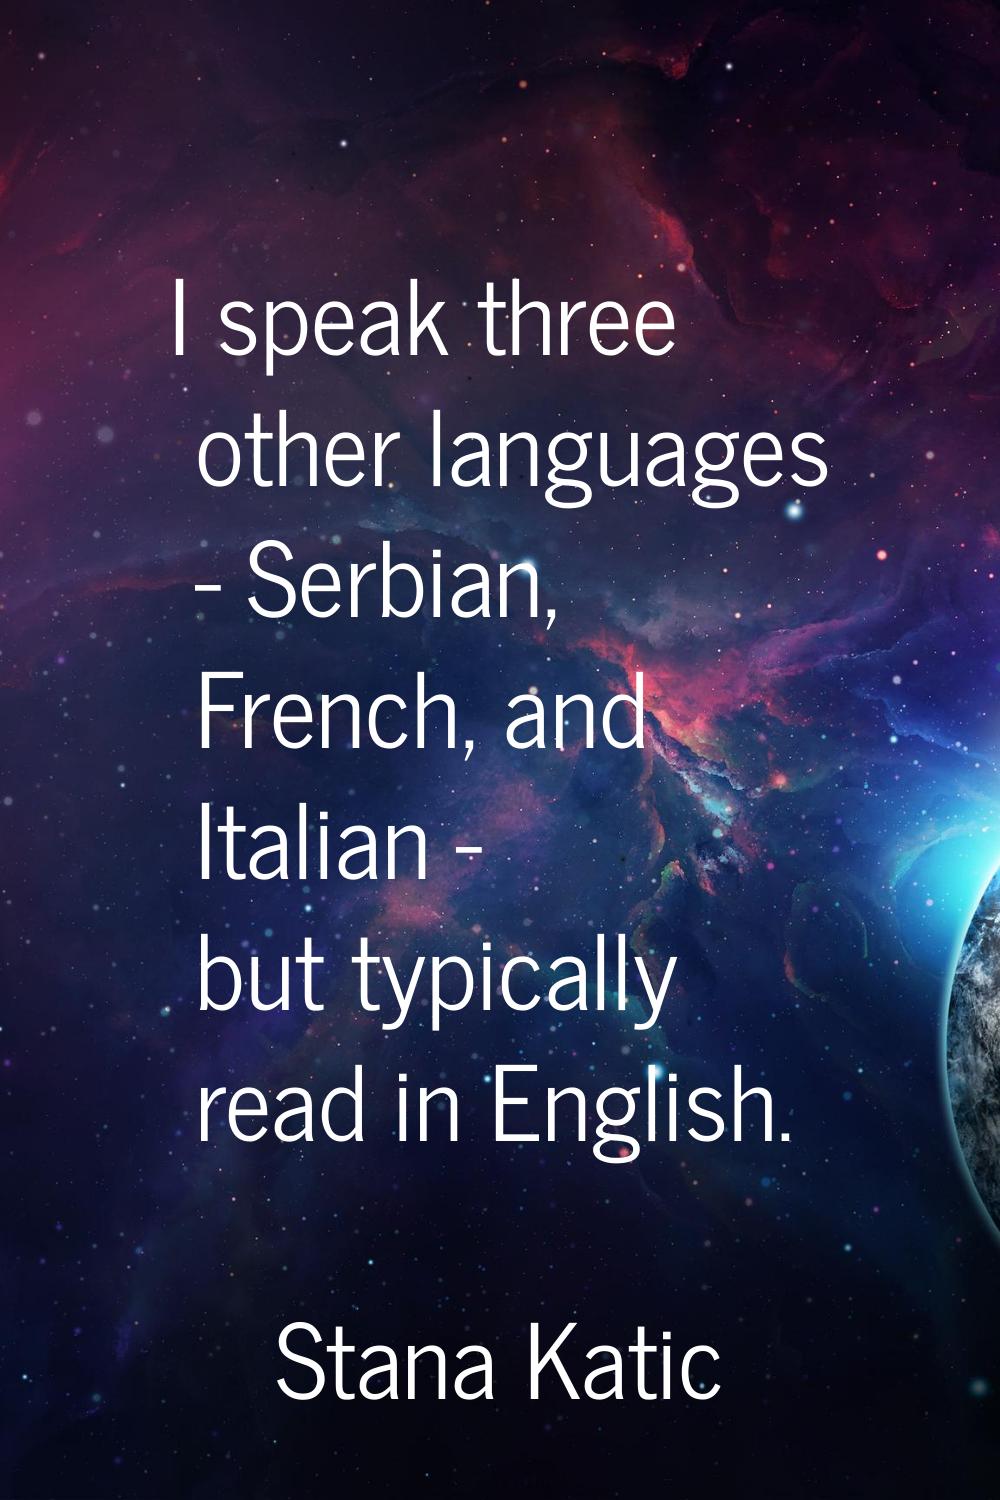 I speak three other languages - Serbian, French, and Italian - but typically read in English.